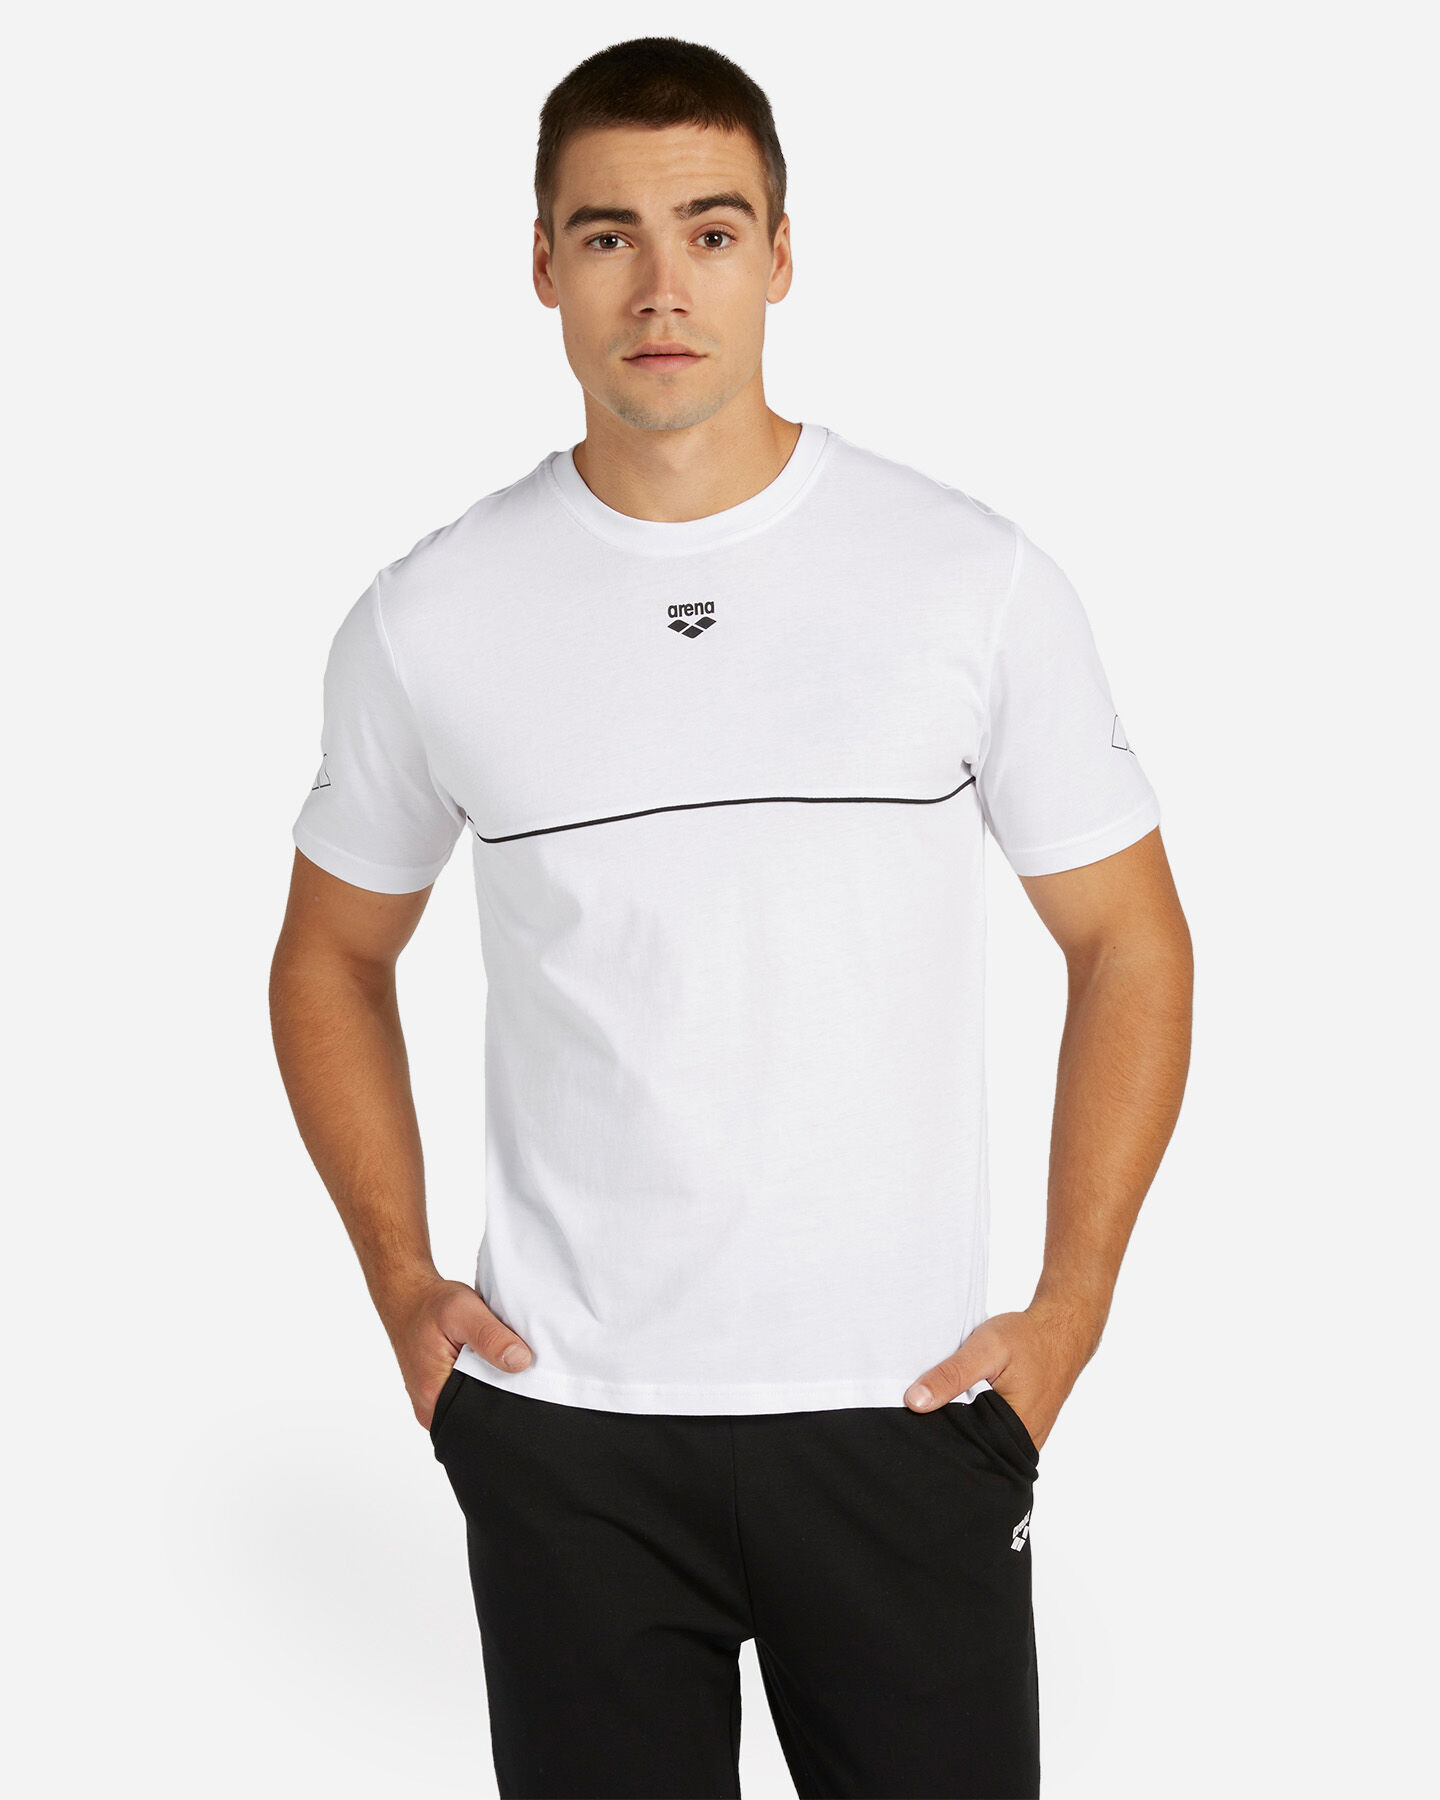  T-Shirt ARENA CLASSIC SPORT M S4105828|001|S scatto 0